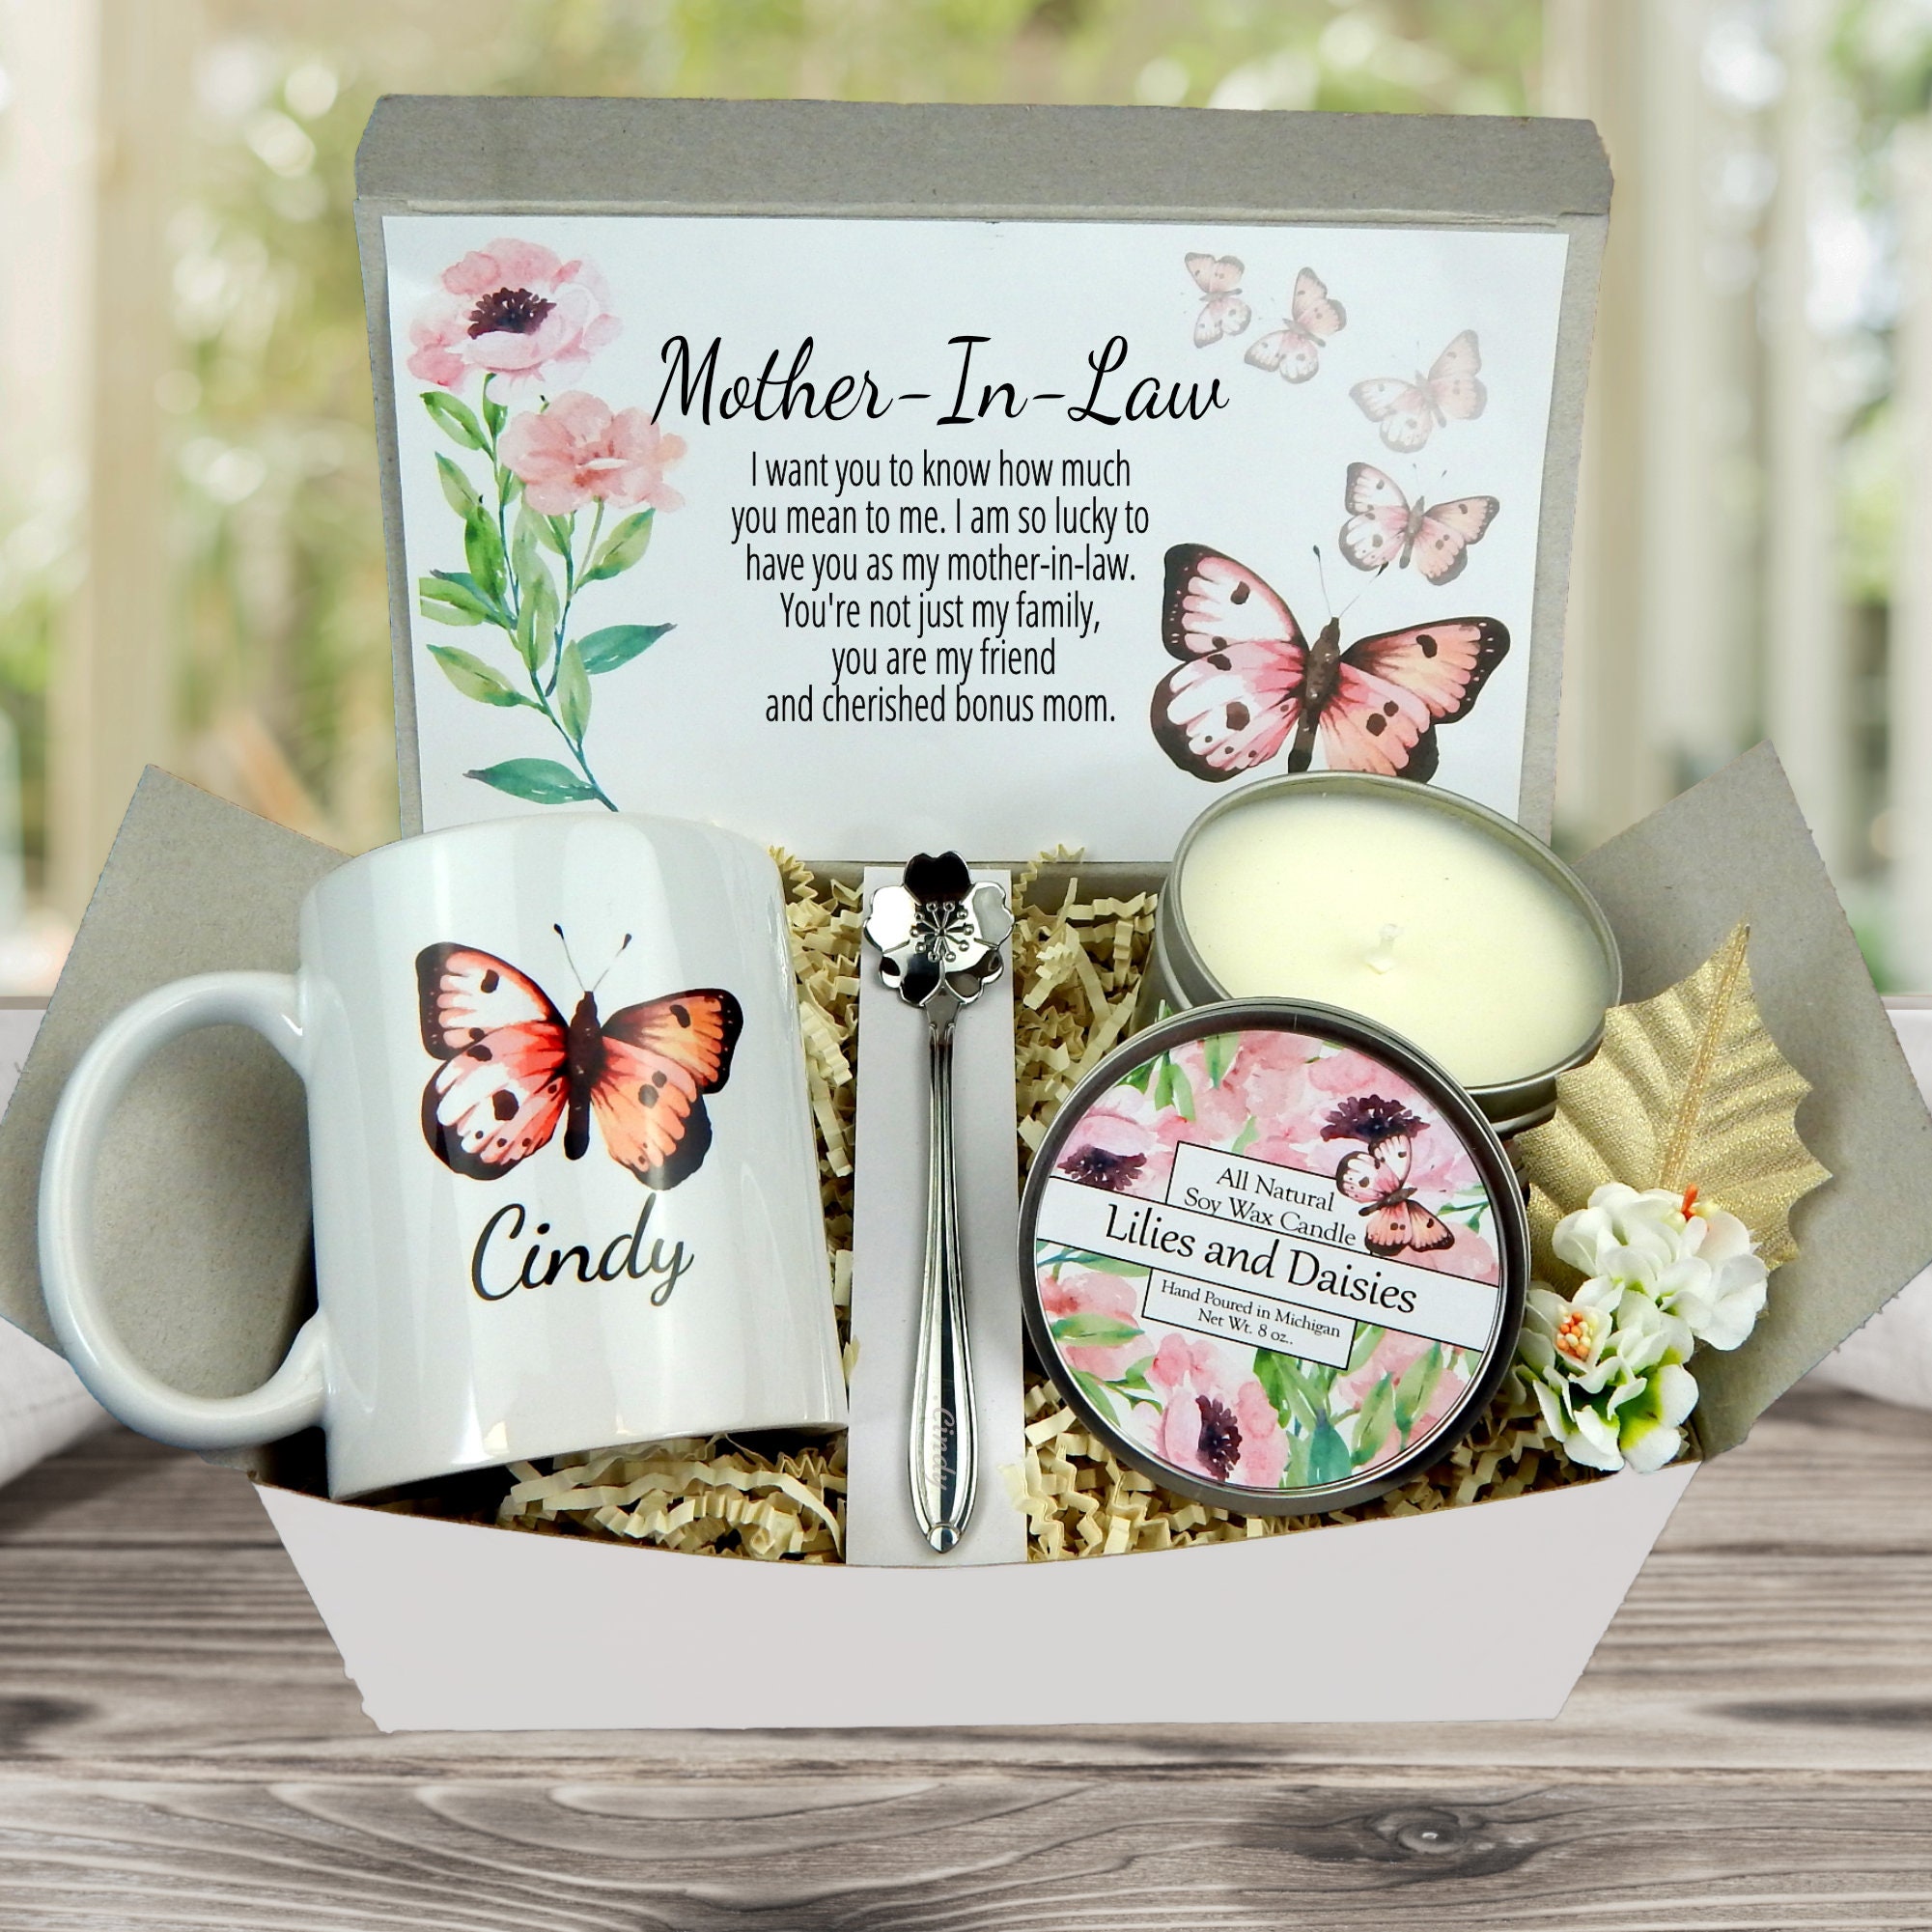  GIFTAGIRL Mother in Law, Mothers Day or Birthday Gifts -  Lovely Mother in Law Gifts with a Beautiful Message and Meaning, A Very  Unique Gift Idea for Any Occasion, and